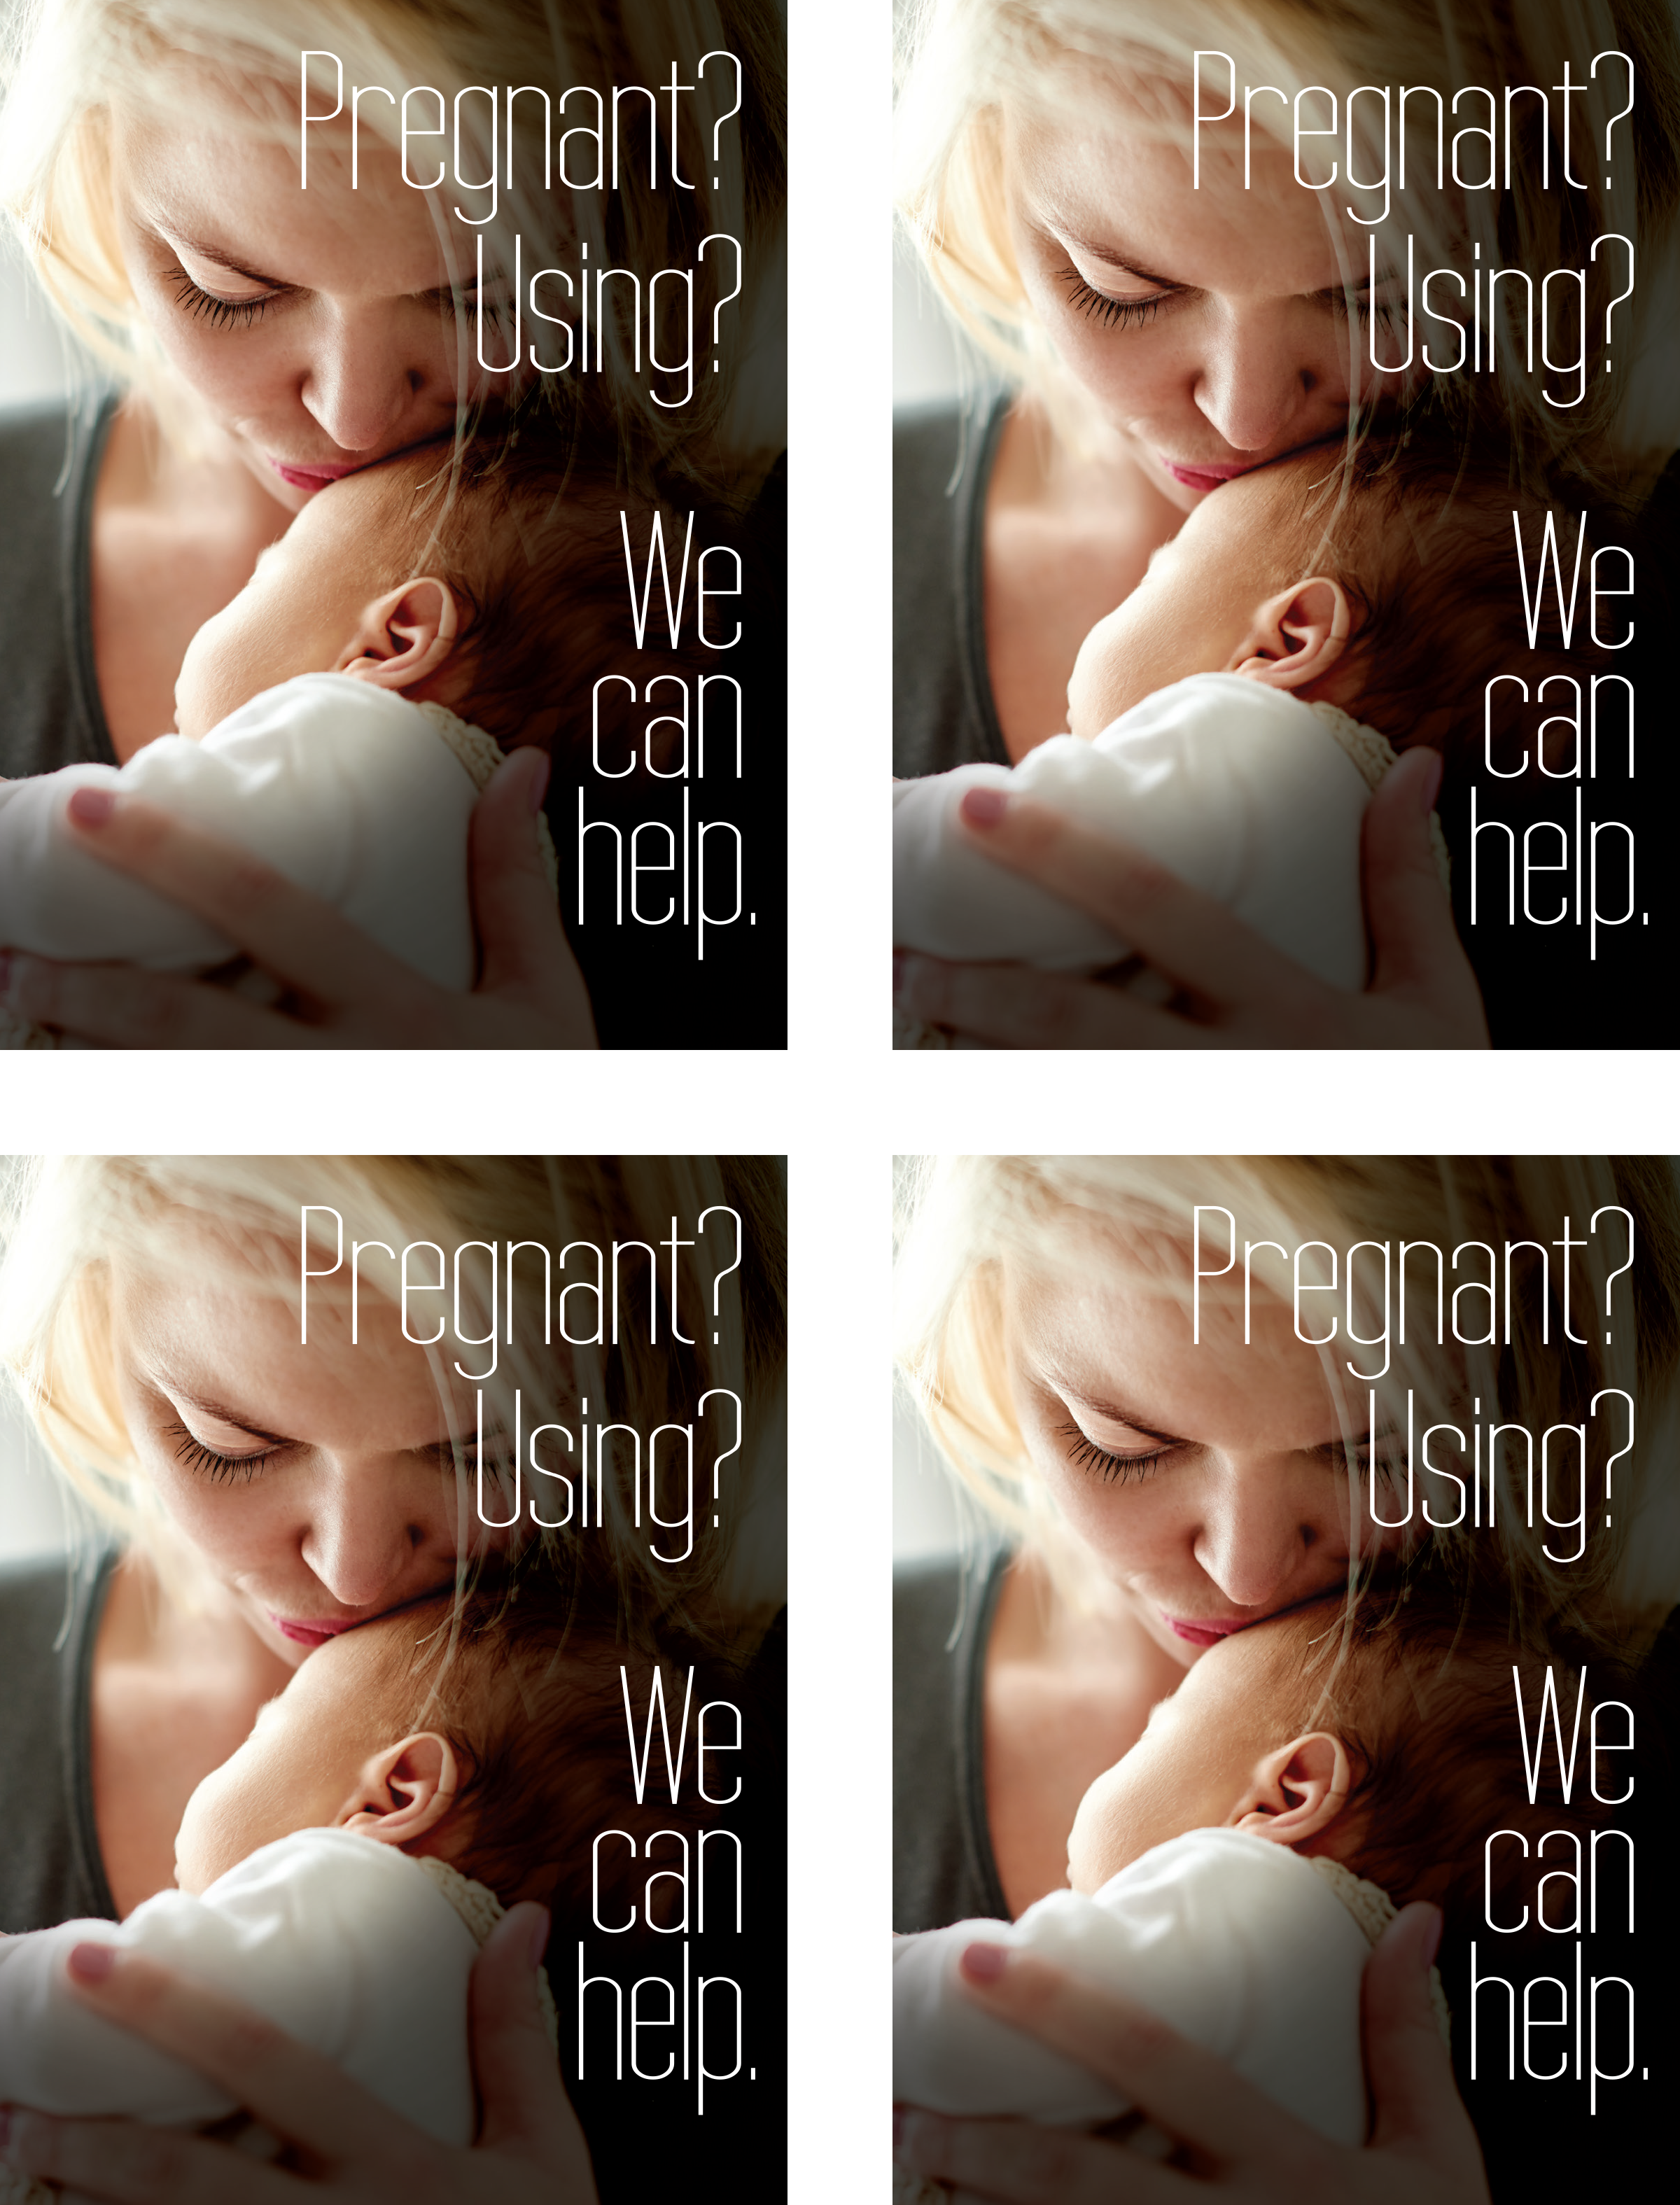 Pregnant? Using? We can help